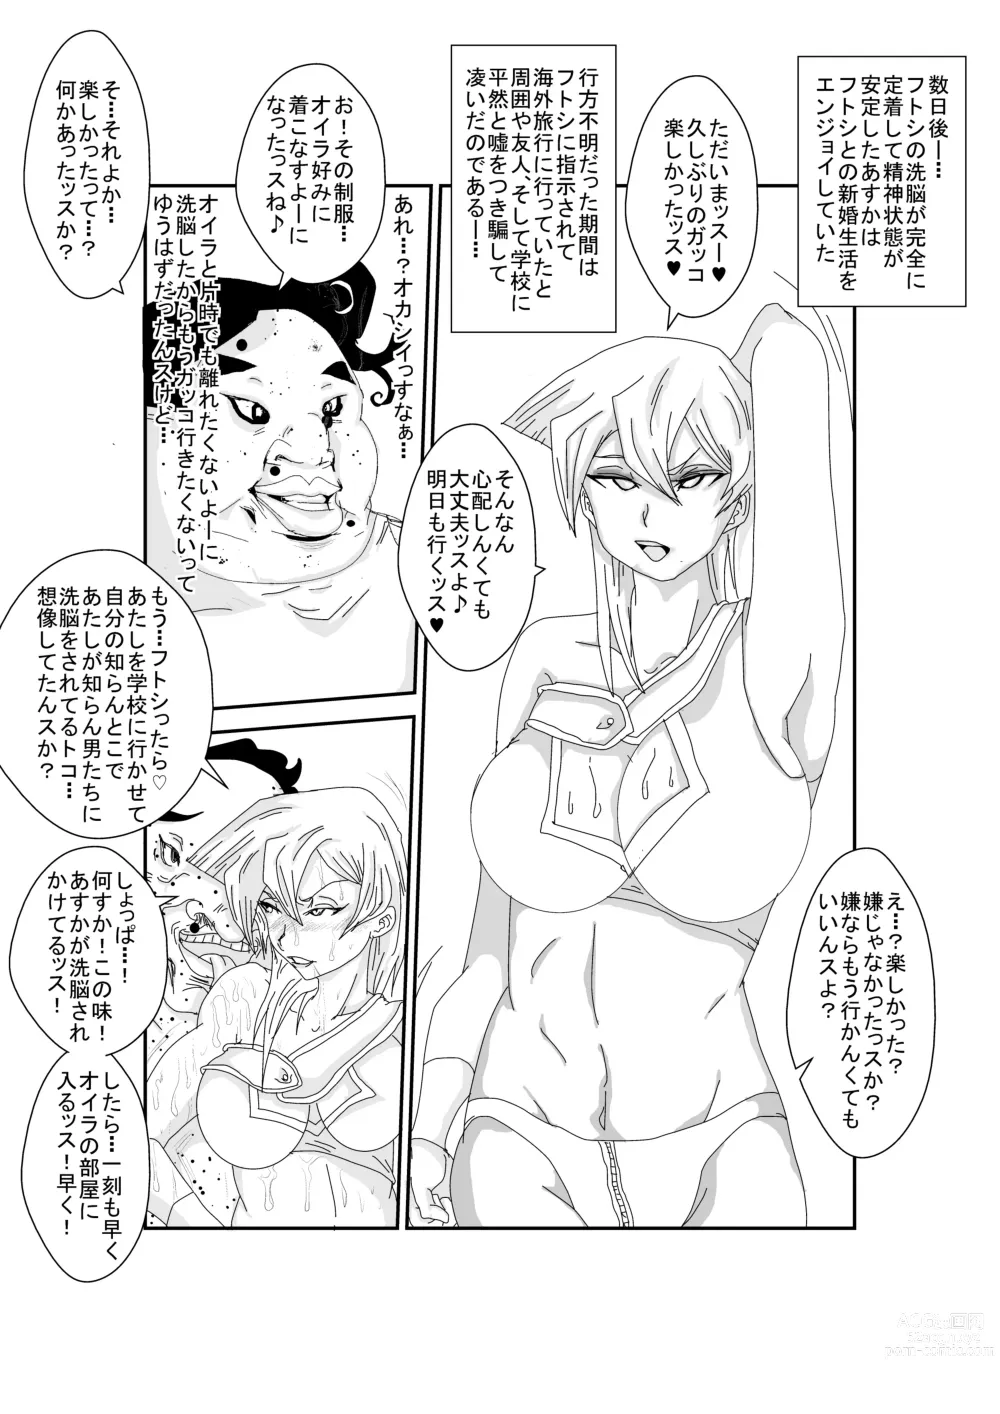 Page 42 of doujinshi Alexis Rodes Corrupted